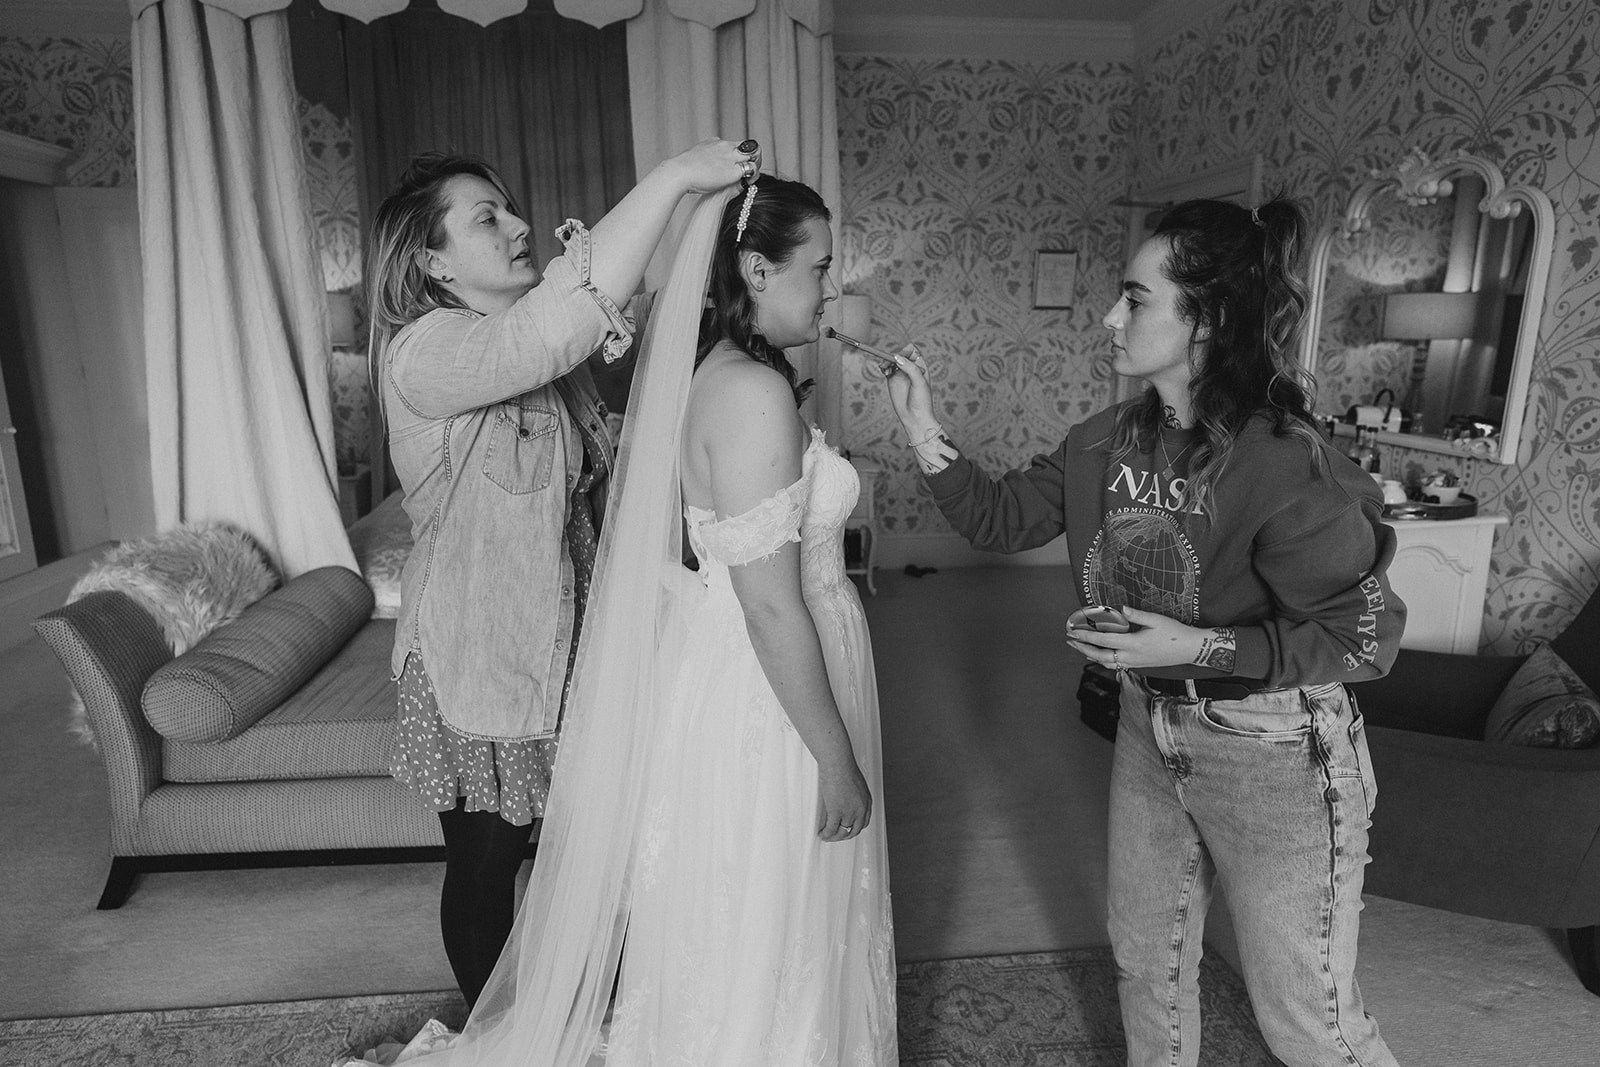 The bride, having the final make up touches after putting on her wedding dress